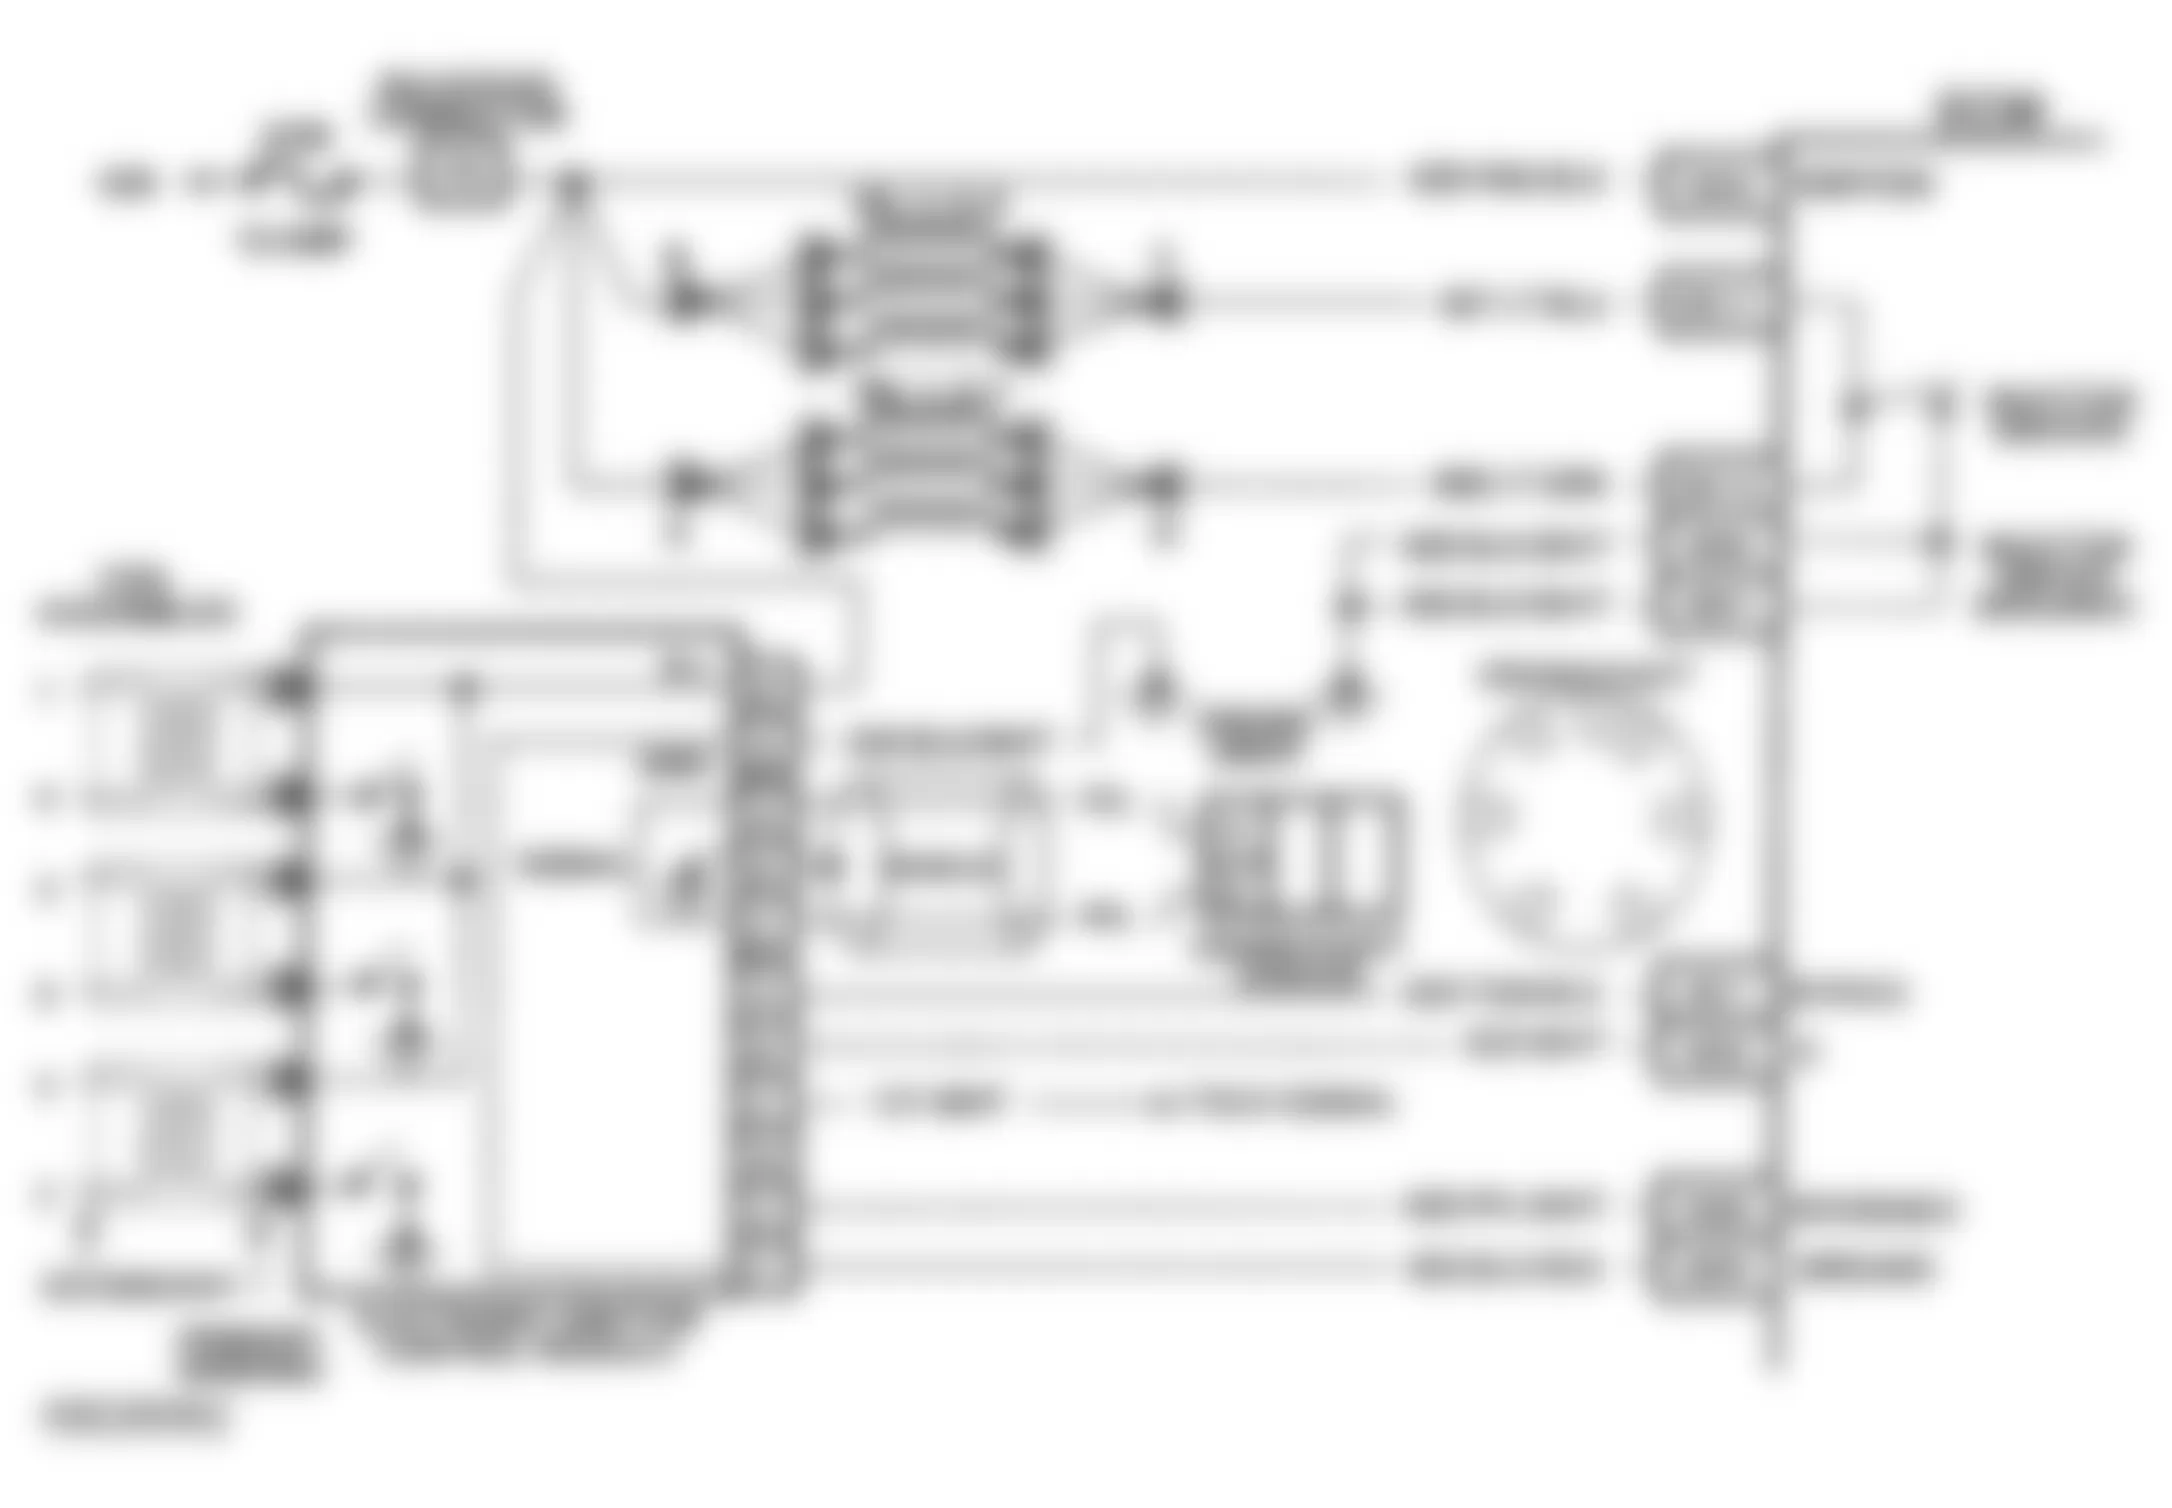 Buick Regal Limited 1993 - Component Locations -  Code 42 Schematic (3.1L J Body) EST Circuit Open Or Grounded